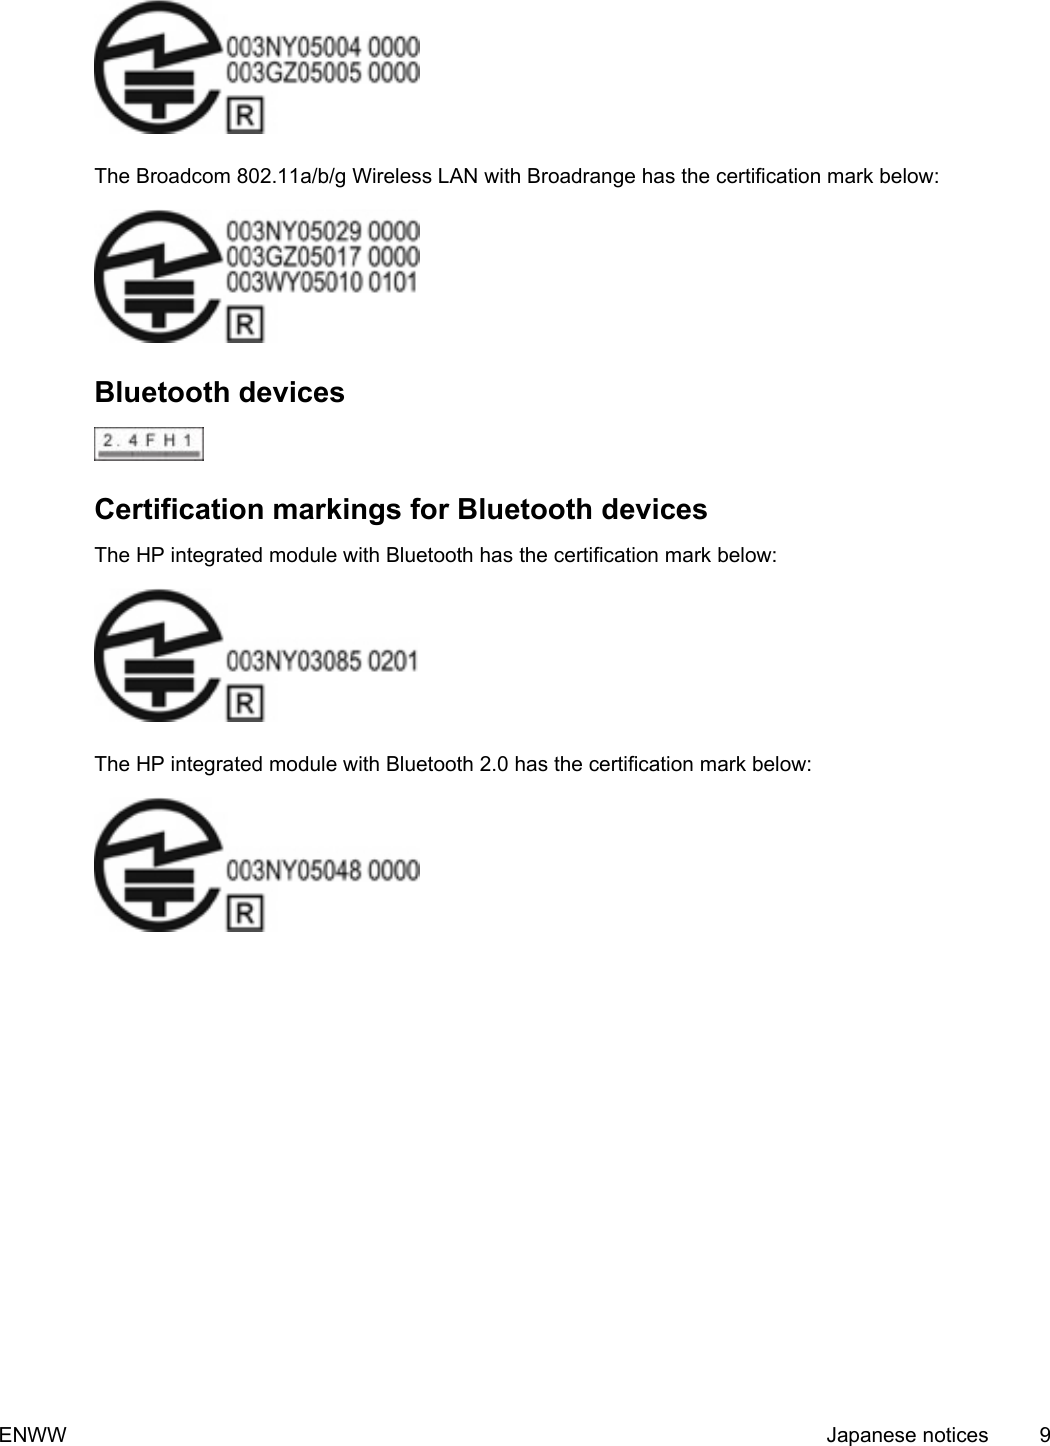 The Broadcom 802.11a/b/g Wireless LAN with Broadrange has the certification mark below:Bluetooth devicesCertification markings for Bluetooth devicesThe HP integrated module with Bluetooth has the certification mark below:The HP integrated module with Bluetooth 2.0 has the certification mark below:ENWW Japanese notices 9